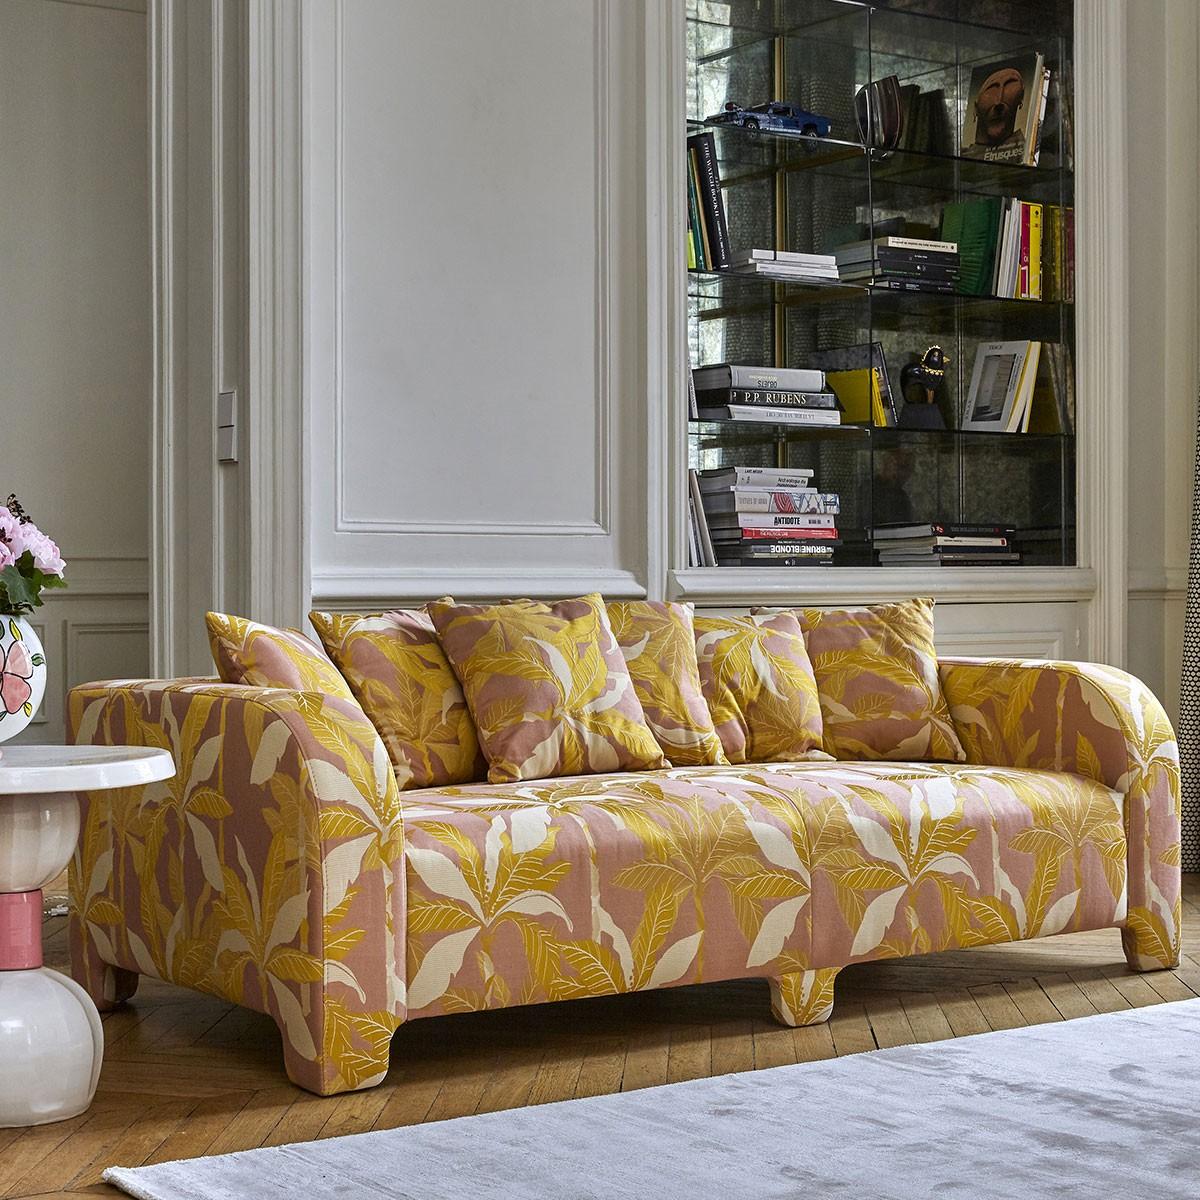 Popus Editions Graziella 4 Seater Sofa in Yellow Como Velvet Upholstery

A foot that hides another. A cushion that hides another. A curve that hides another with contemporary lines and a base like a punctuation mark, this sofa gives pride of place